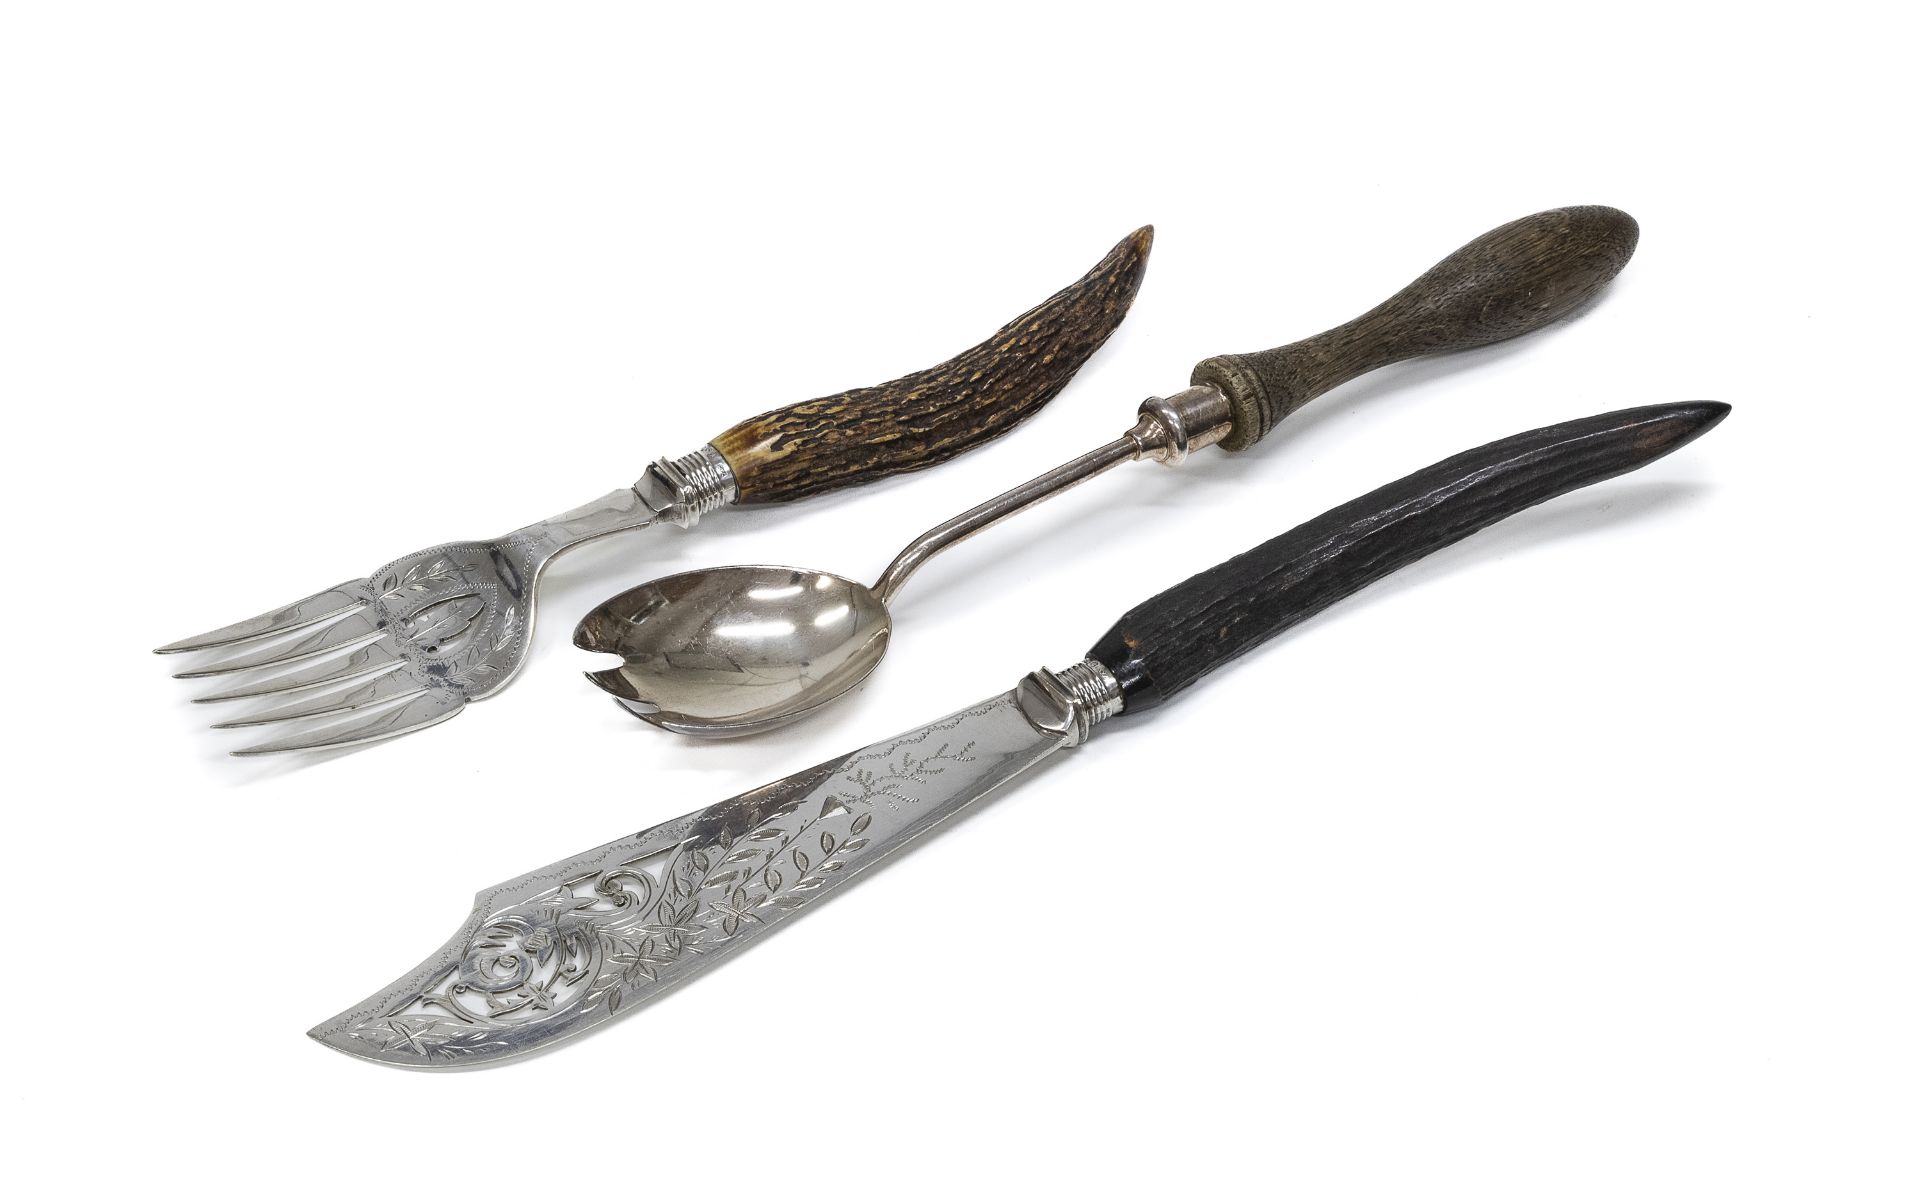 THREE PIECES OF SERVING CUTLERY IN SHEFFIELD ENGLAND EARLY 20TH CENTURY